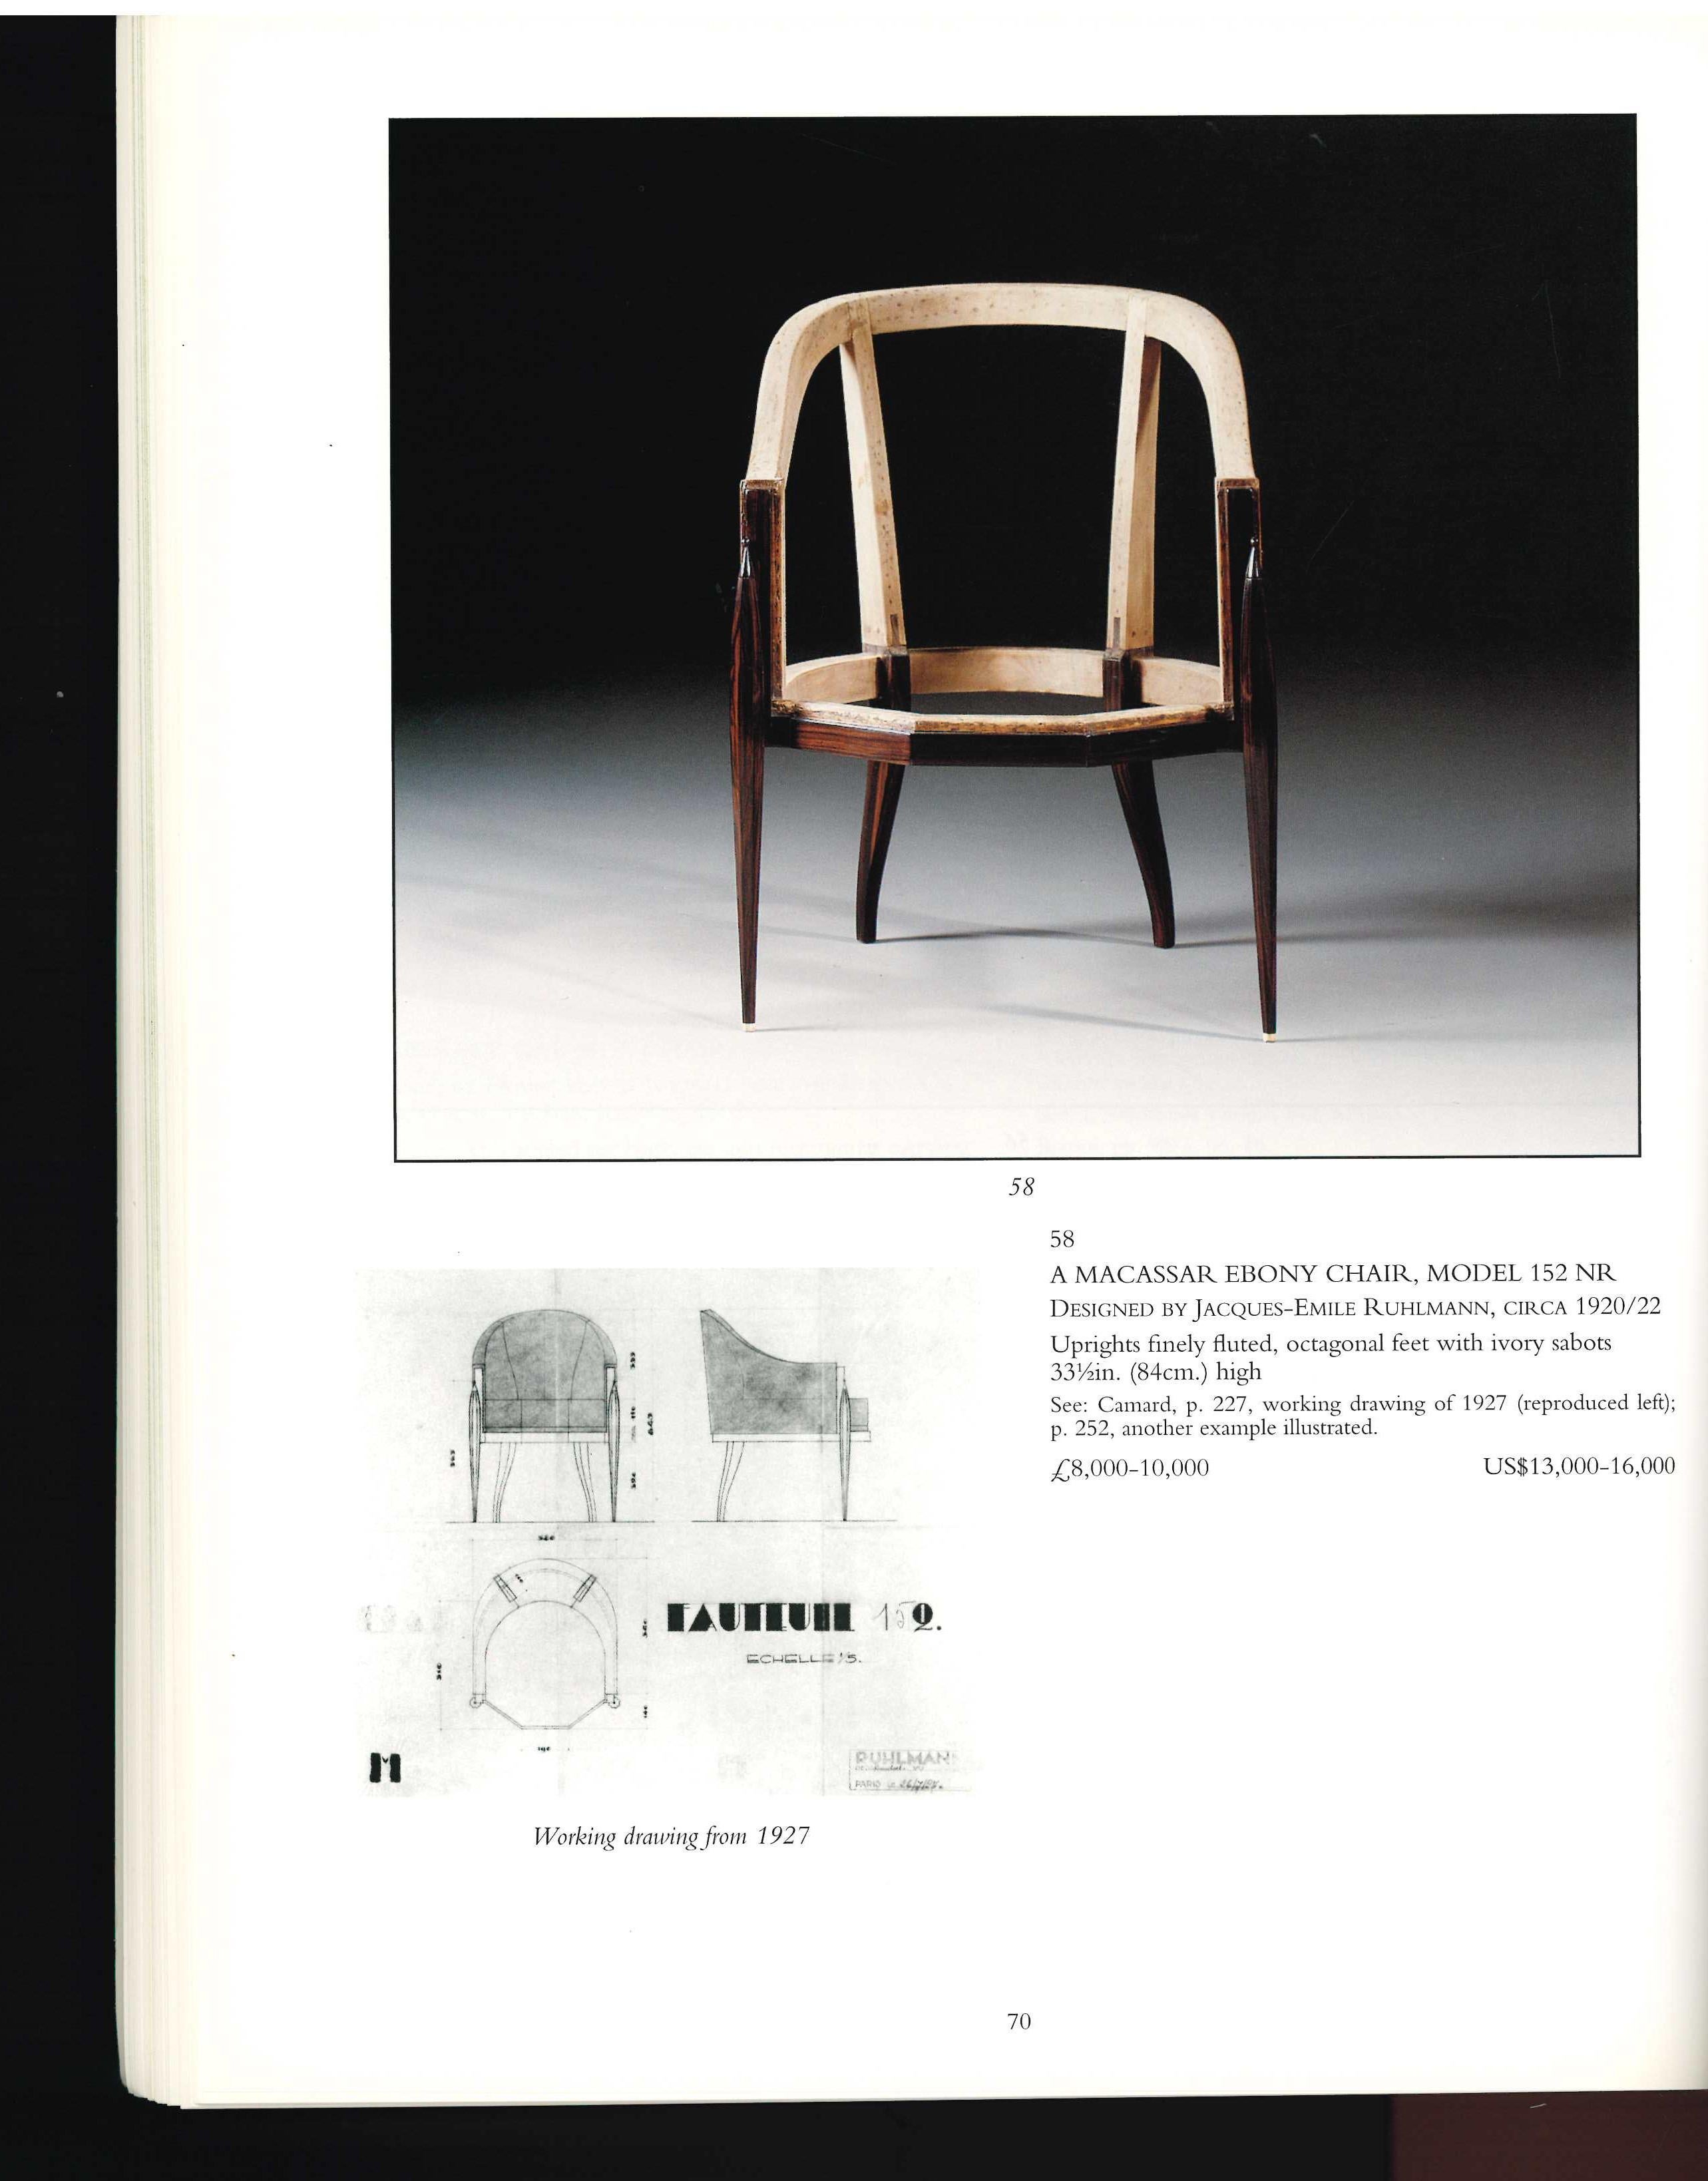 THE CHAIR, Christie's Auction Catalogue 29 October 1997 3